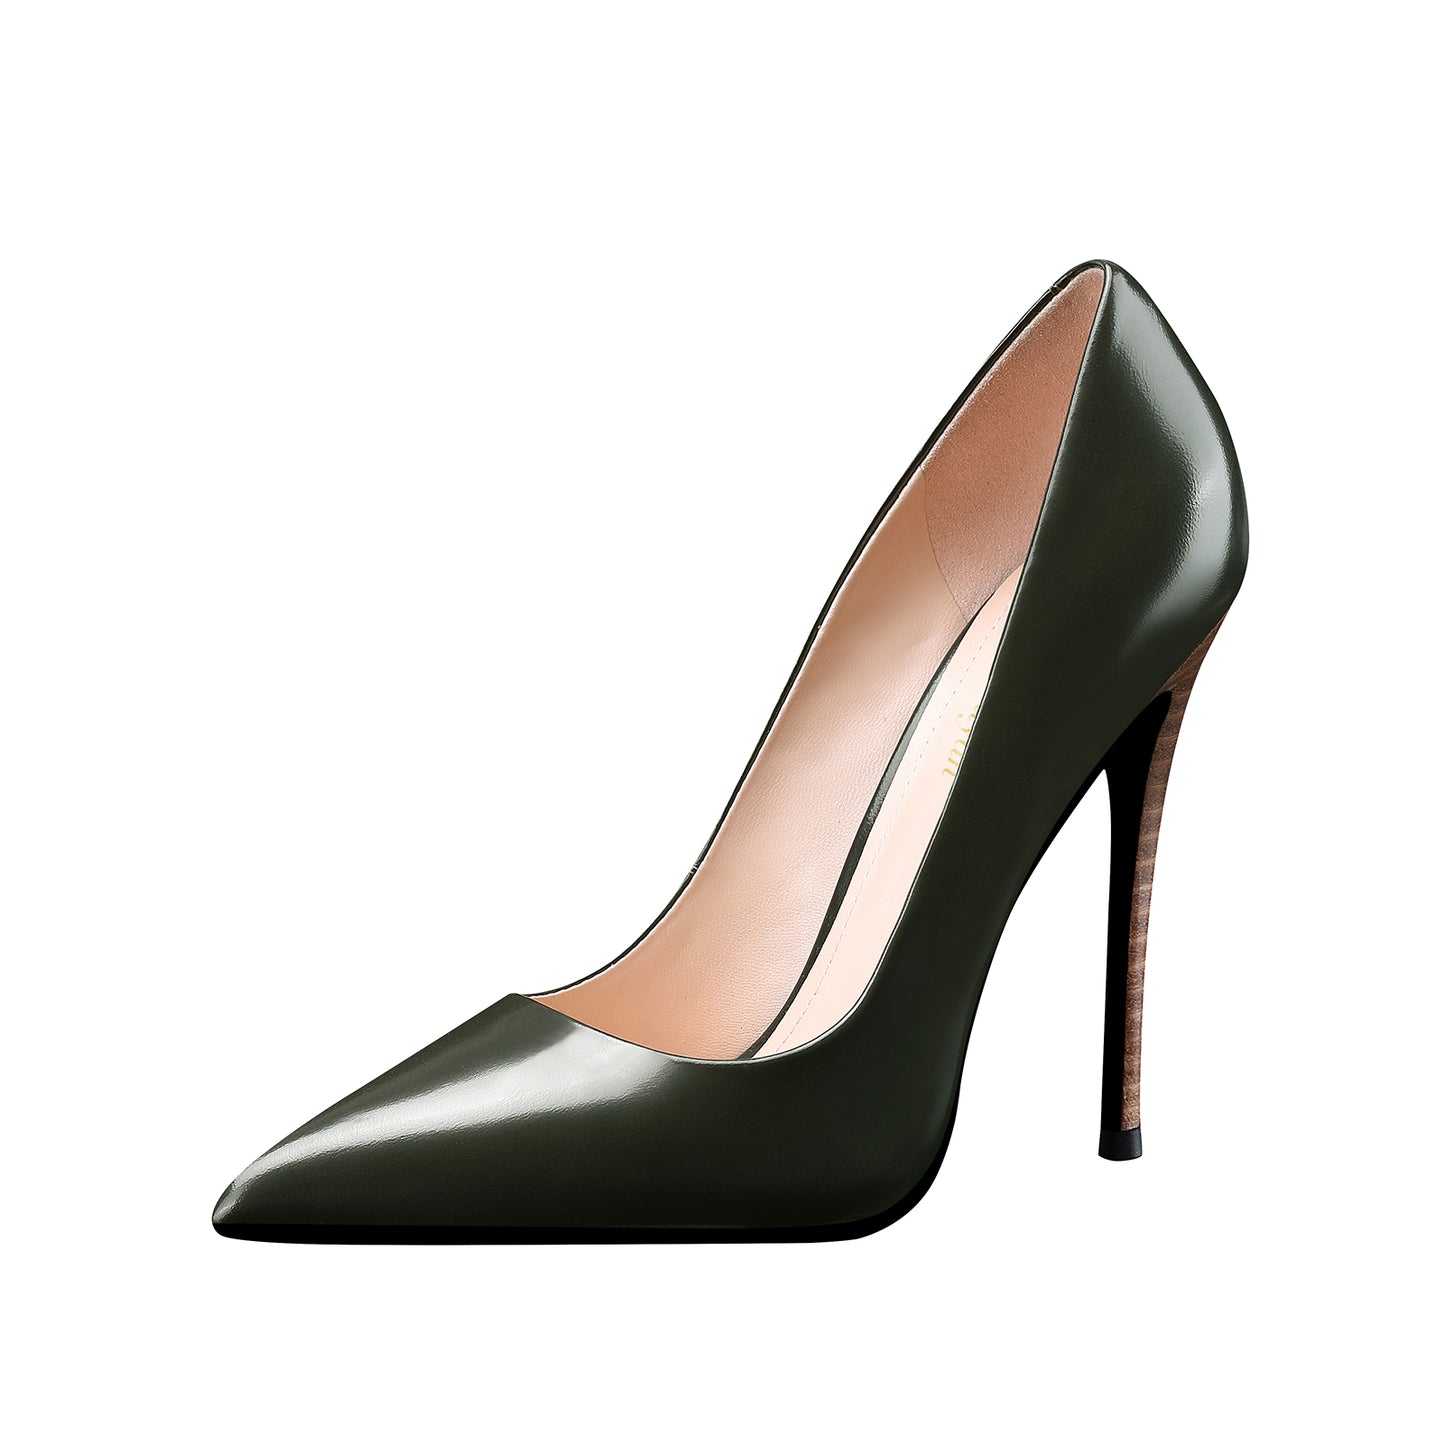 Slip-On Stiletto Pumps with Pointed Toe Leather High Heel